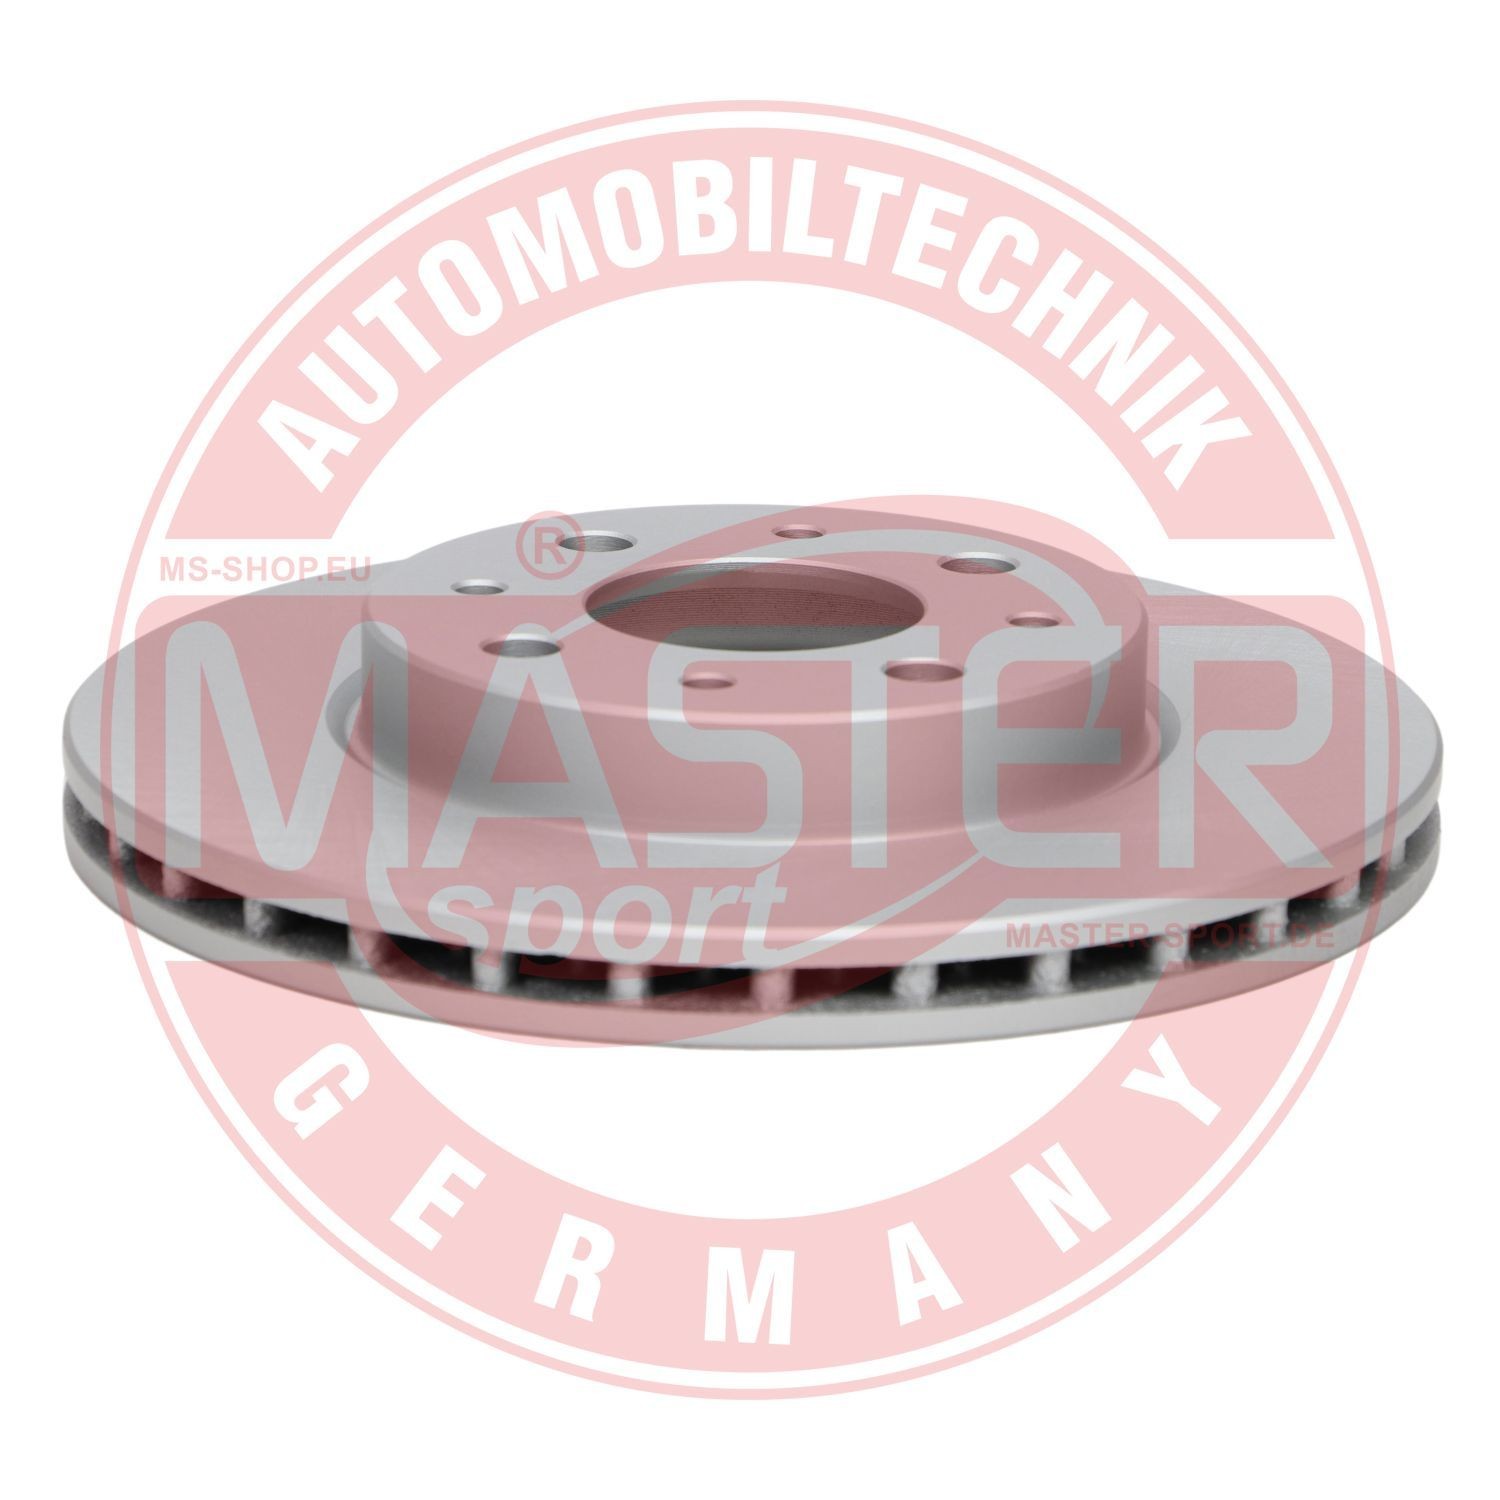 212001845 MASTER-SPORT Front Axle, 241x20mm, 4x98, Vented, Coated Ø: 241mm, Num. of holes: 4, Brake Disc Thickness: 20mm Brake rotor 24012001841PR-PCS-MS buy